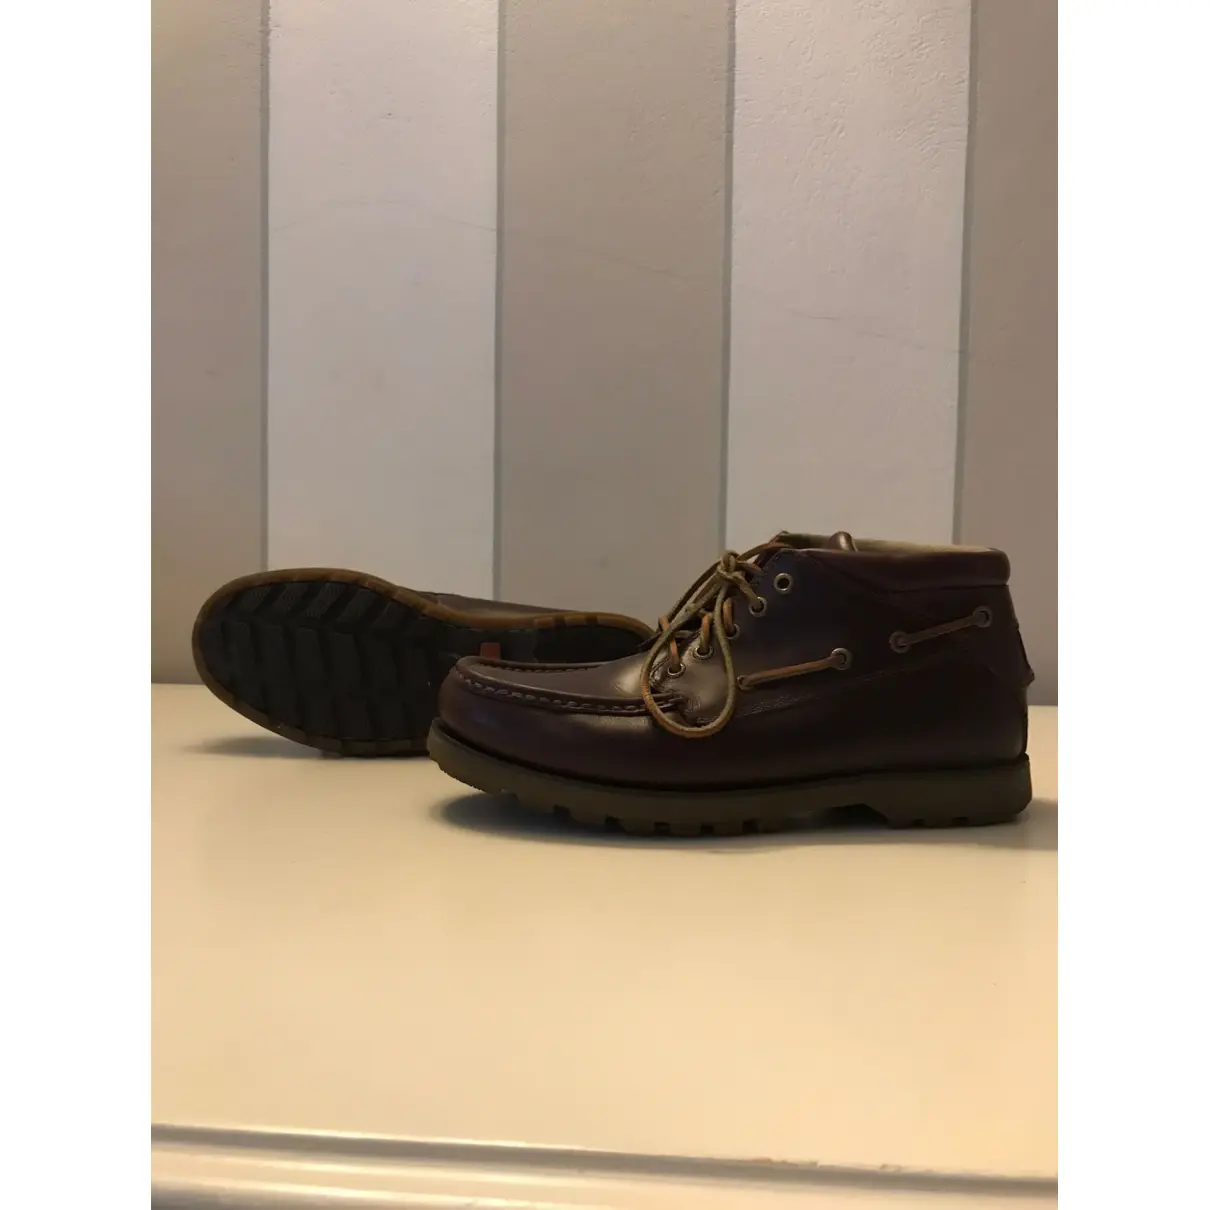 Buy Sperry Leather boots online